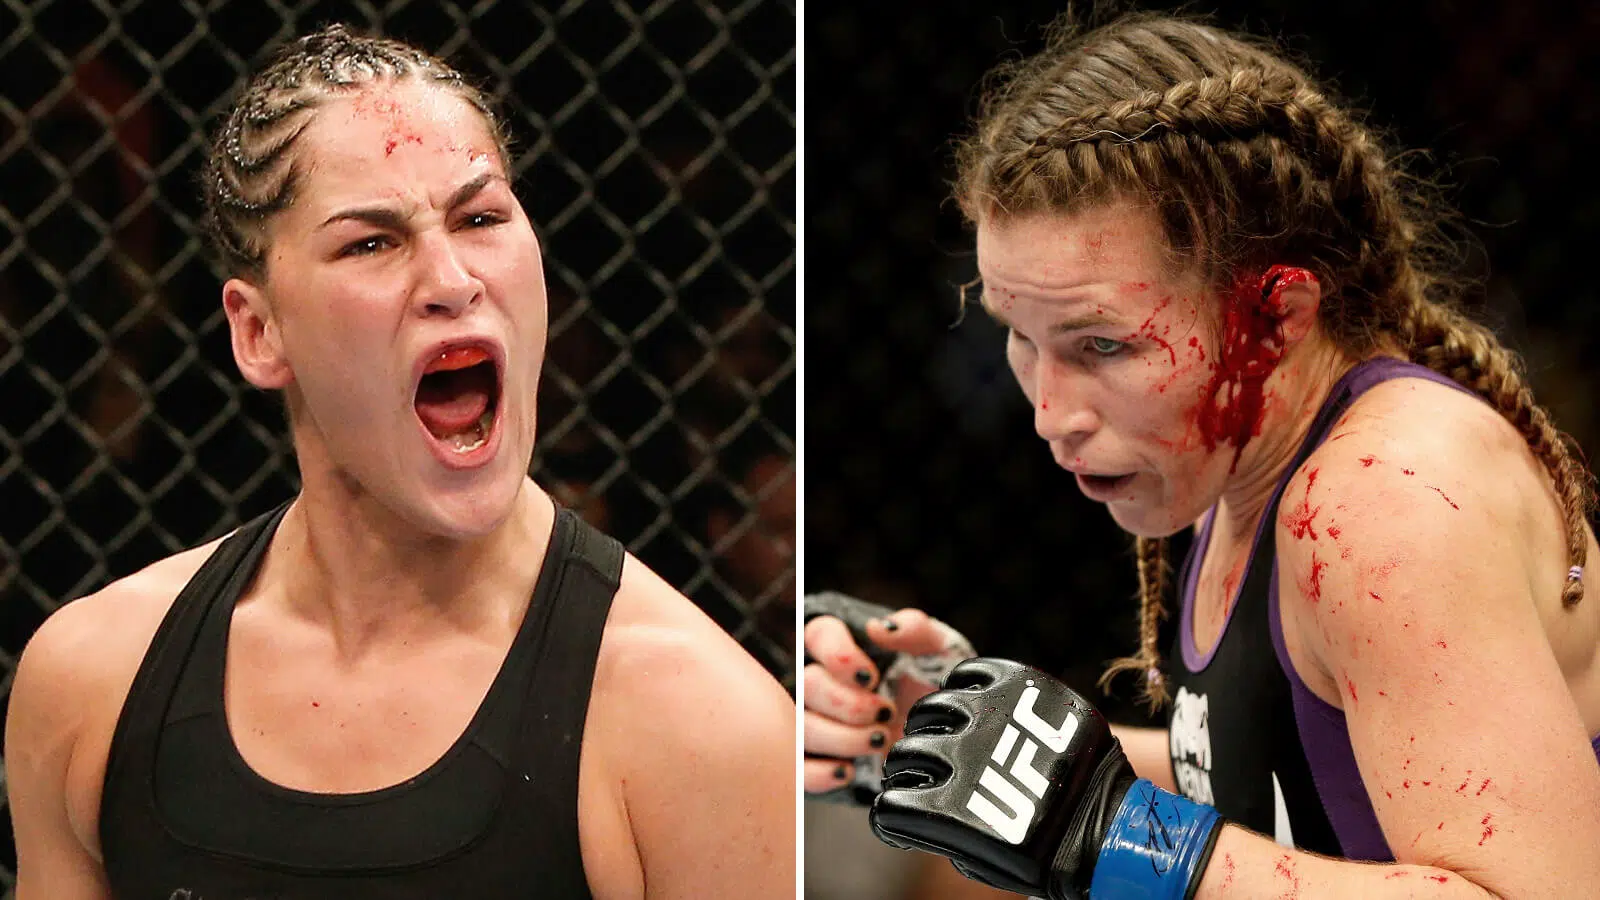 10 Bloodiest MMA Fights in History